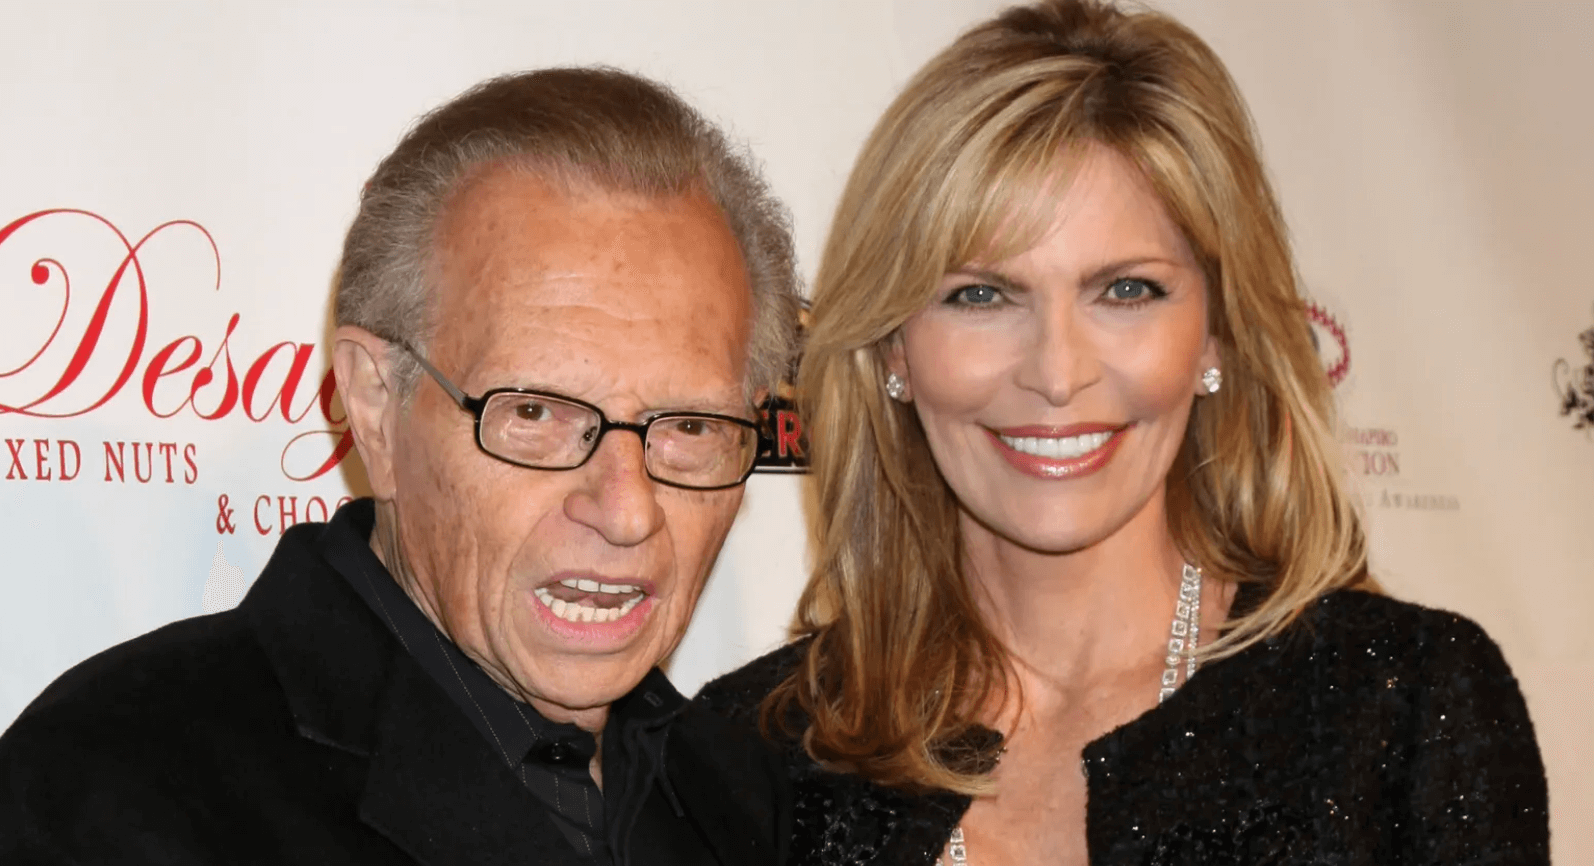 Larry King’s Ex-Wife Files Papers to Challenge Will After Being Excluded!